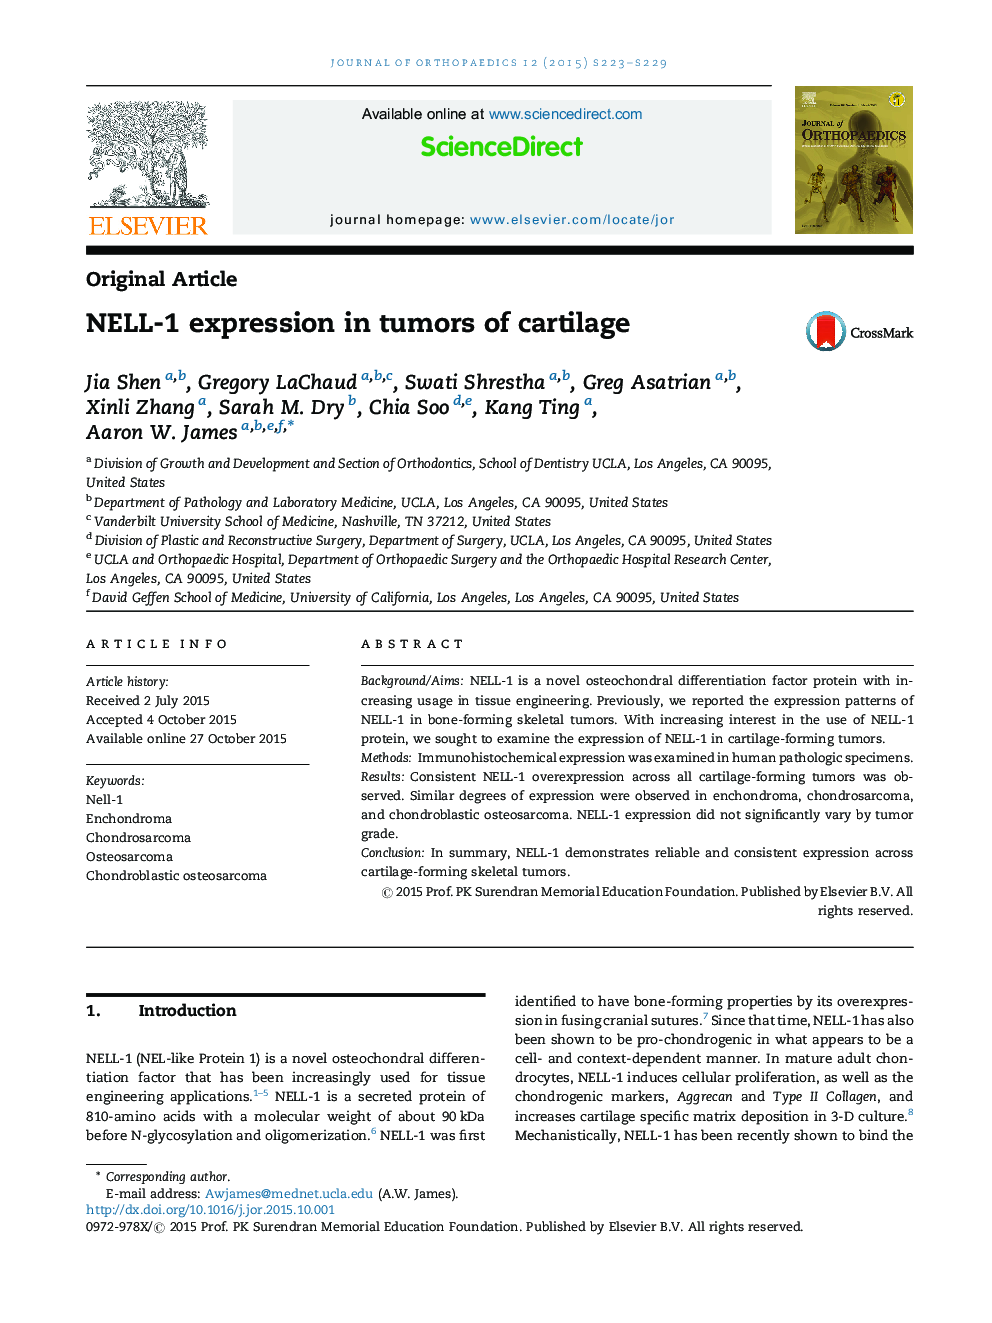 NELL-1 expression in tumors of cartilage